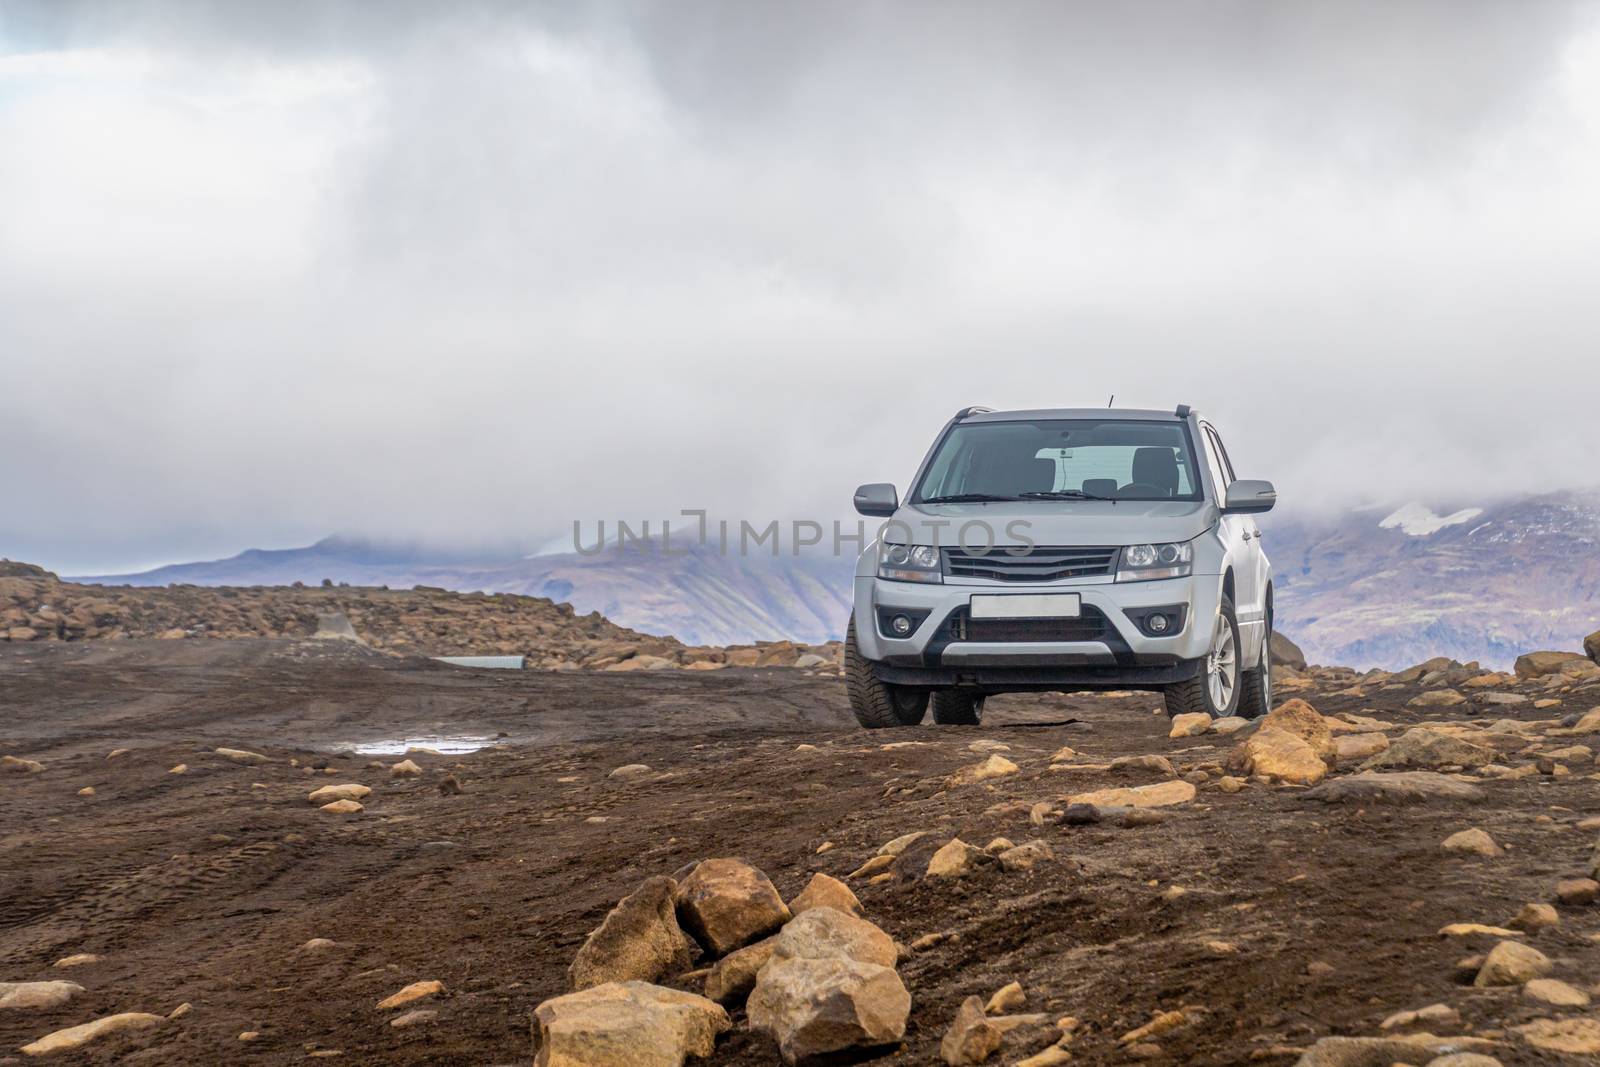 Langjokull Glacier SUV on muddy road standing between rocks in front of mountains by MXW_Stock